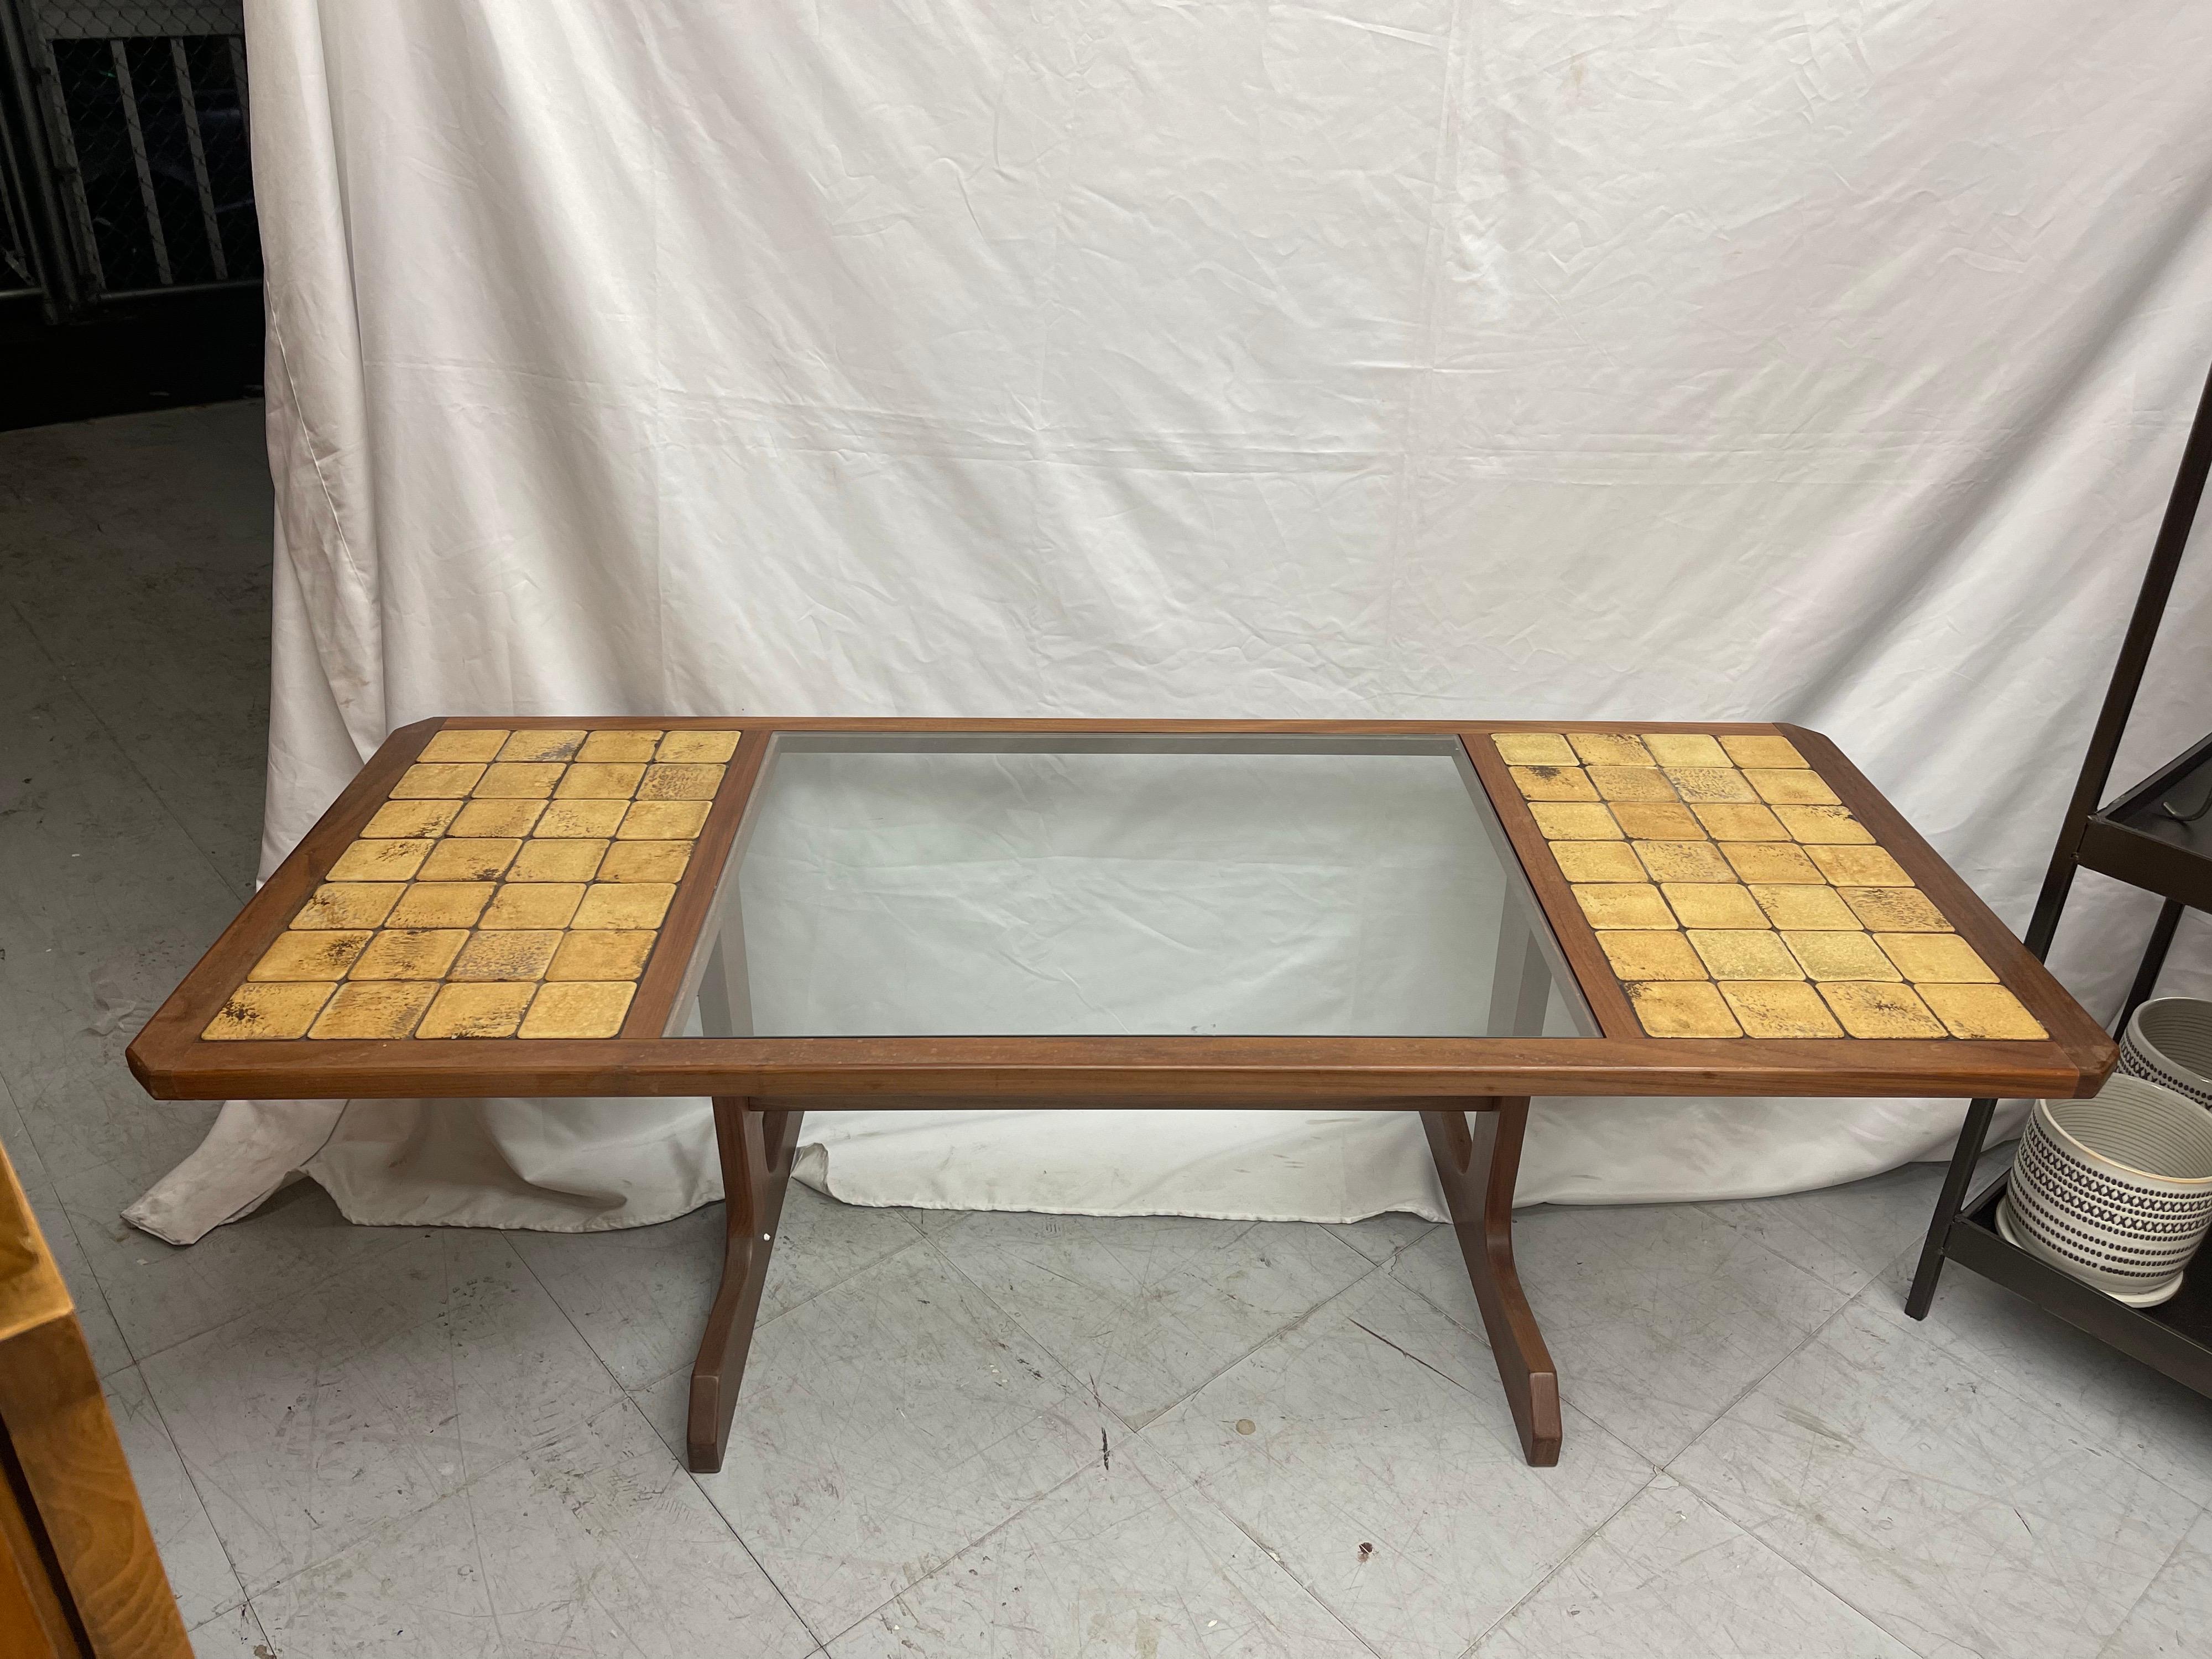 Rare and highly collectible G Plan coffee table. Being both structurally sturdy and sound with only slight signs of age, with all tiles intact and unmarked, this is an impressive, well designed and built piece of modern vintage furniture. Hugely